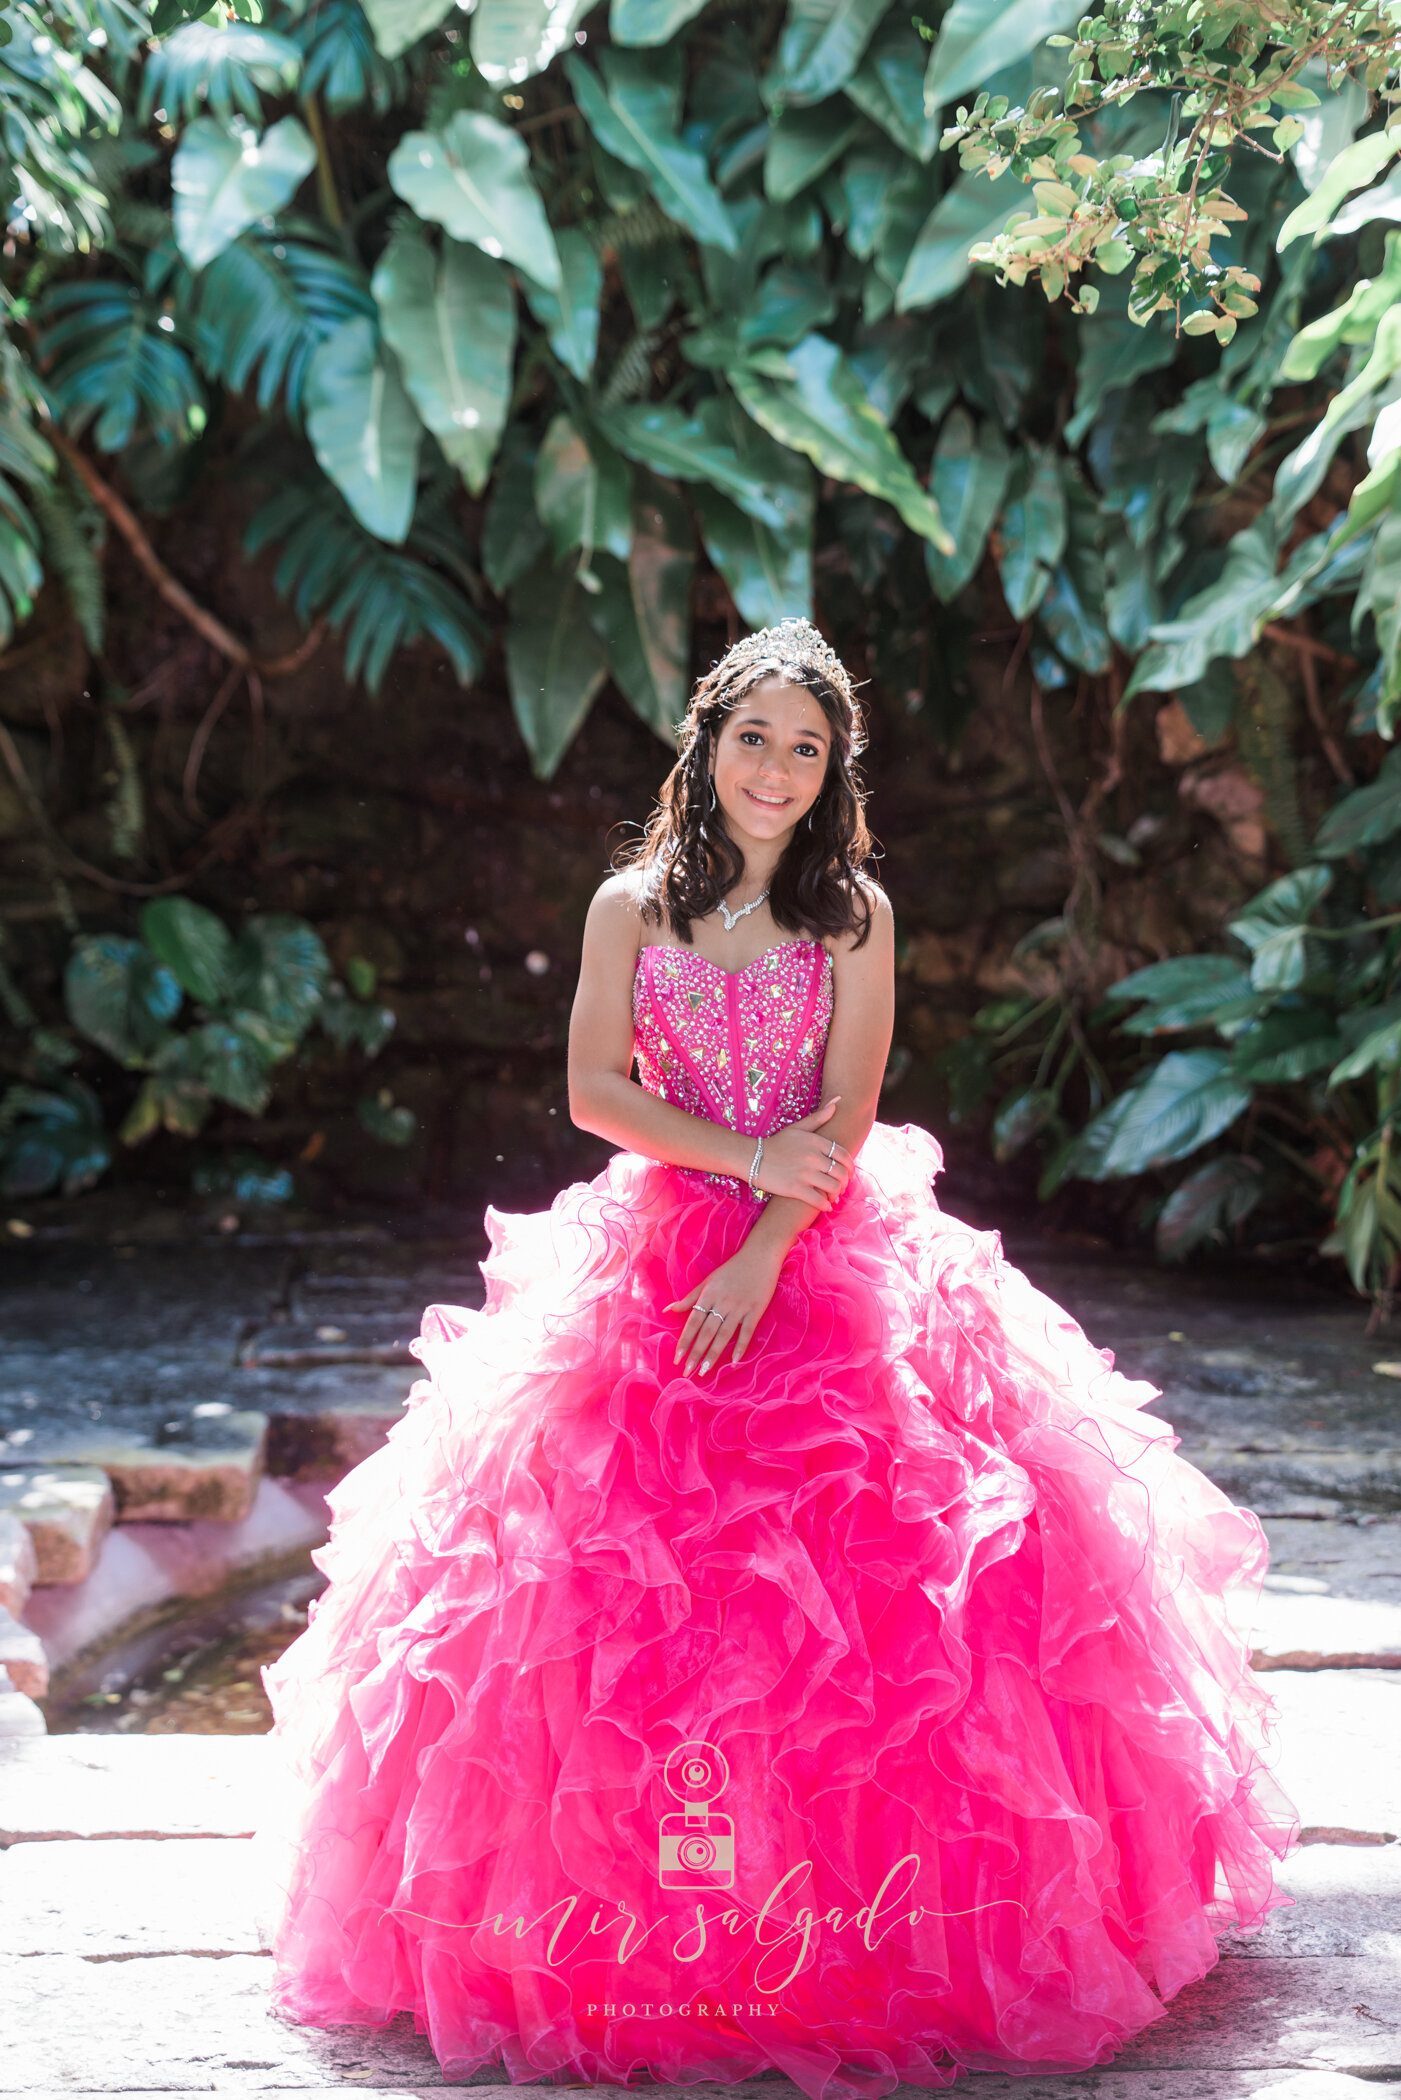 quince-gown, quinceanera-ballgown, quinceanera-princess-ballgown-dress, quinceanera-dress-inspiration